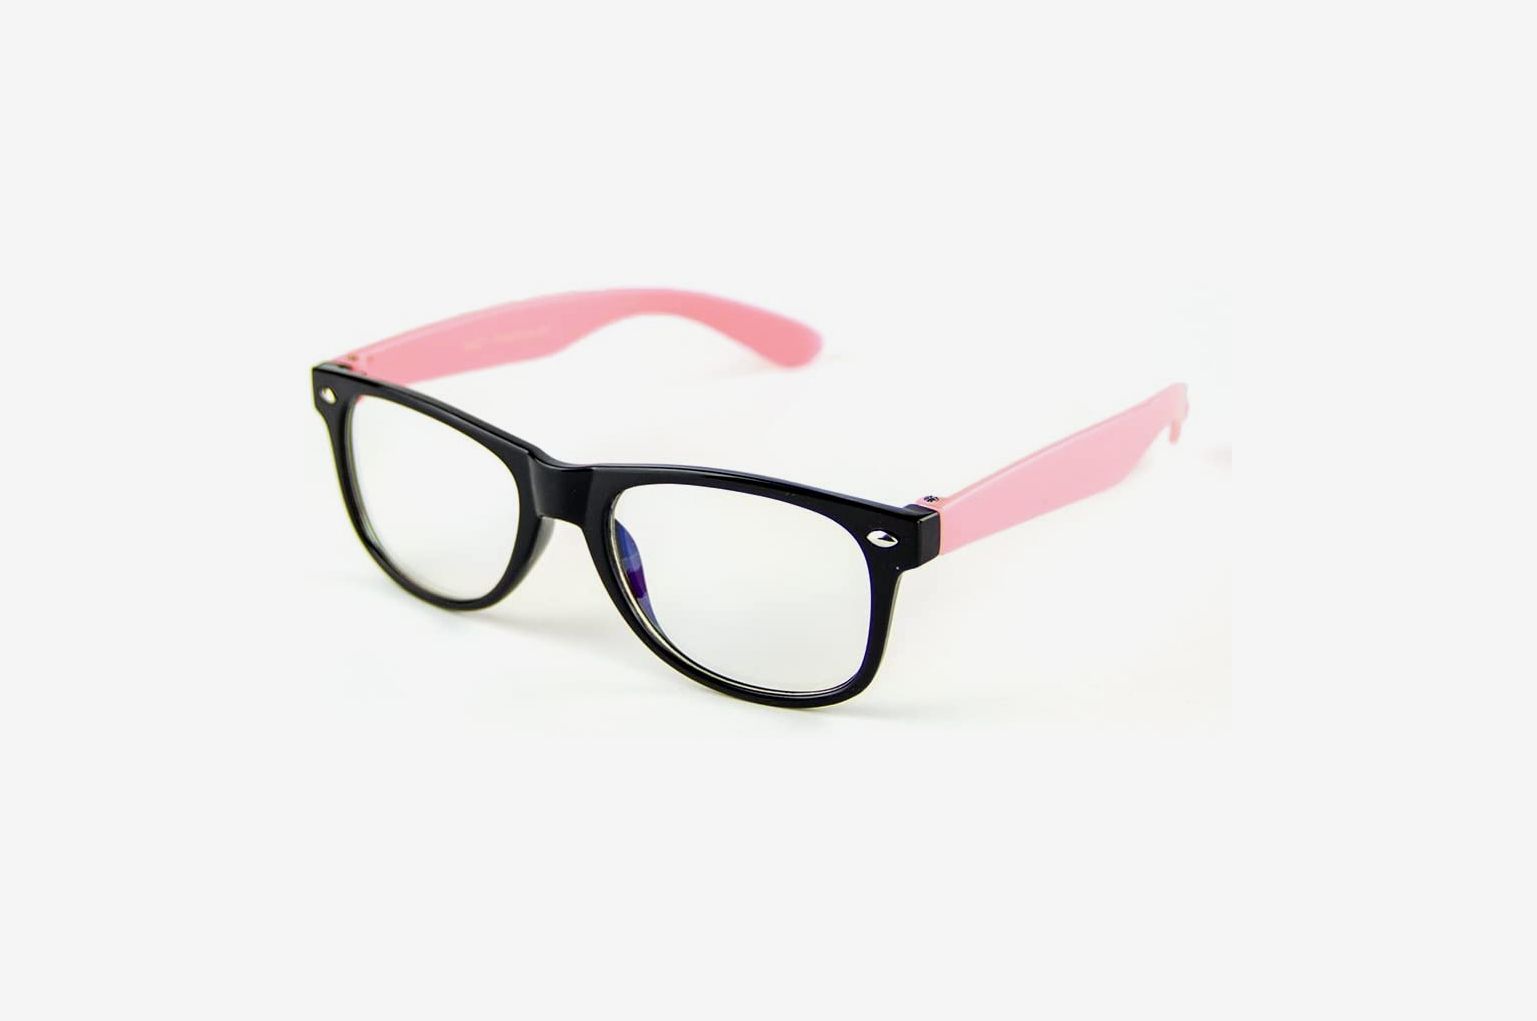 Homework & Gaming Coopers Kids Blue Light Blocking Glasses Pink and Black Eye Protection for Computer Anti-UV Glare - for Girls & Boys Ages 3-12 Computer Filter Glasses Screens 2 Pack 